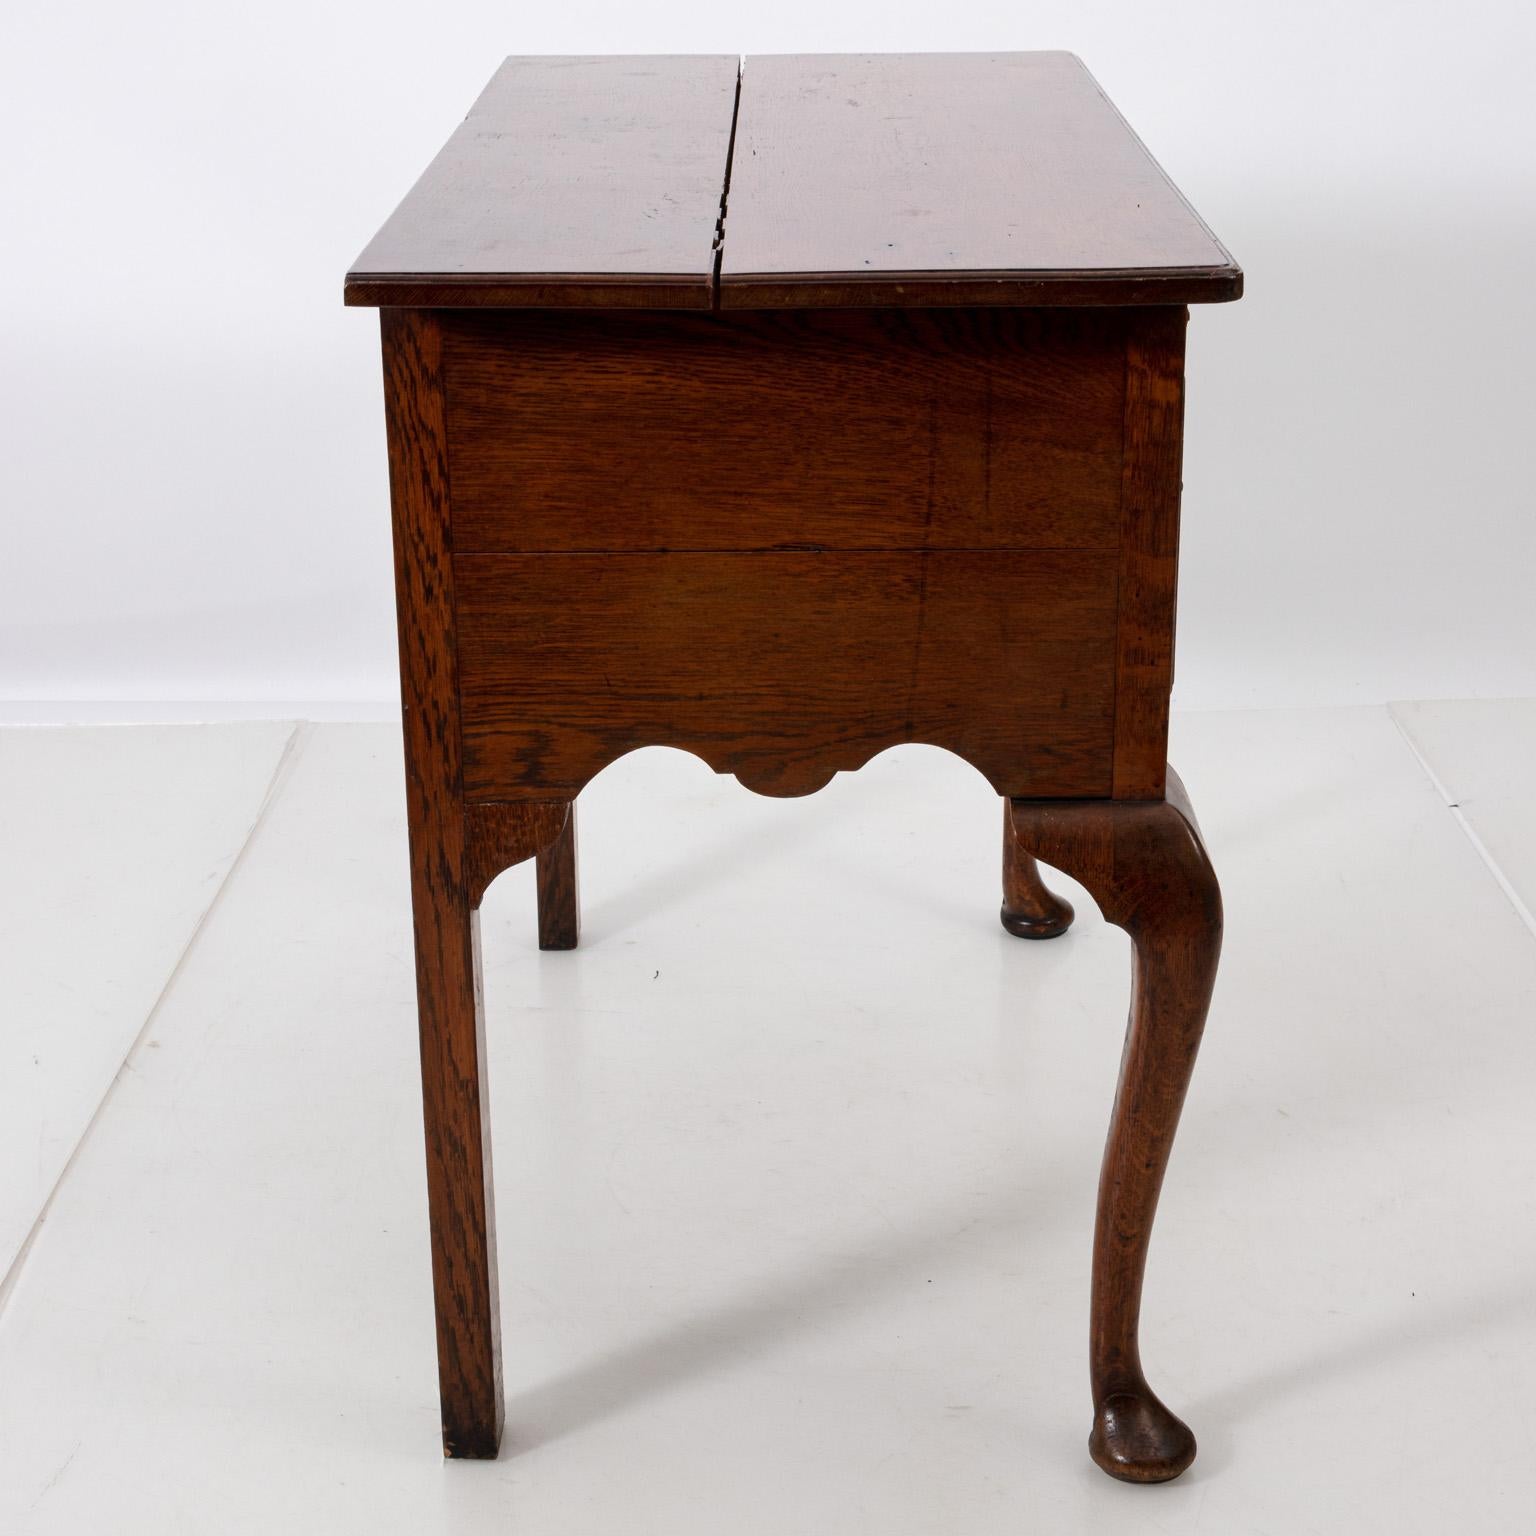 English oakwood low boy in the Queen Anne style with three drawers, cabriole legs, and pad feet, circa 1900s. The piece also features Brass pulls and decorative escutcheon. Please note of wear consistent with age including a split on the tabletop